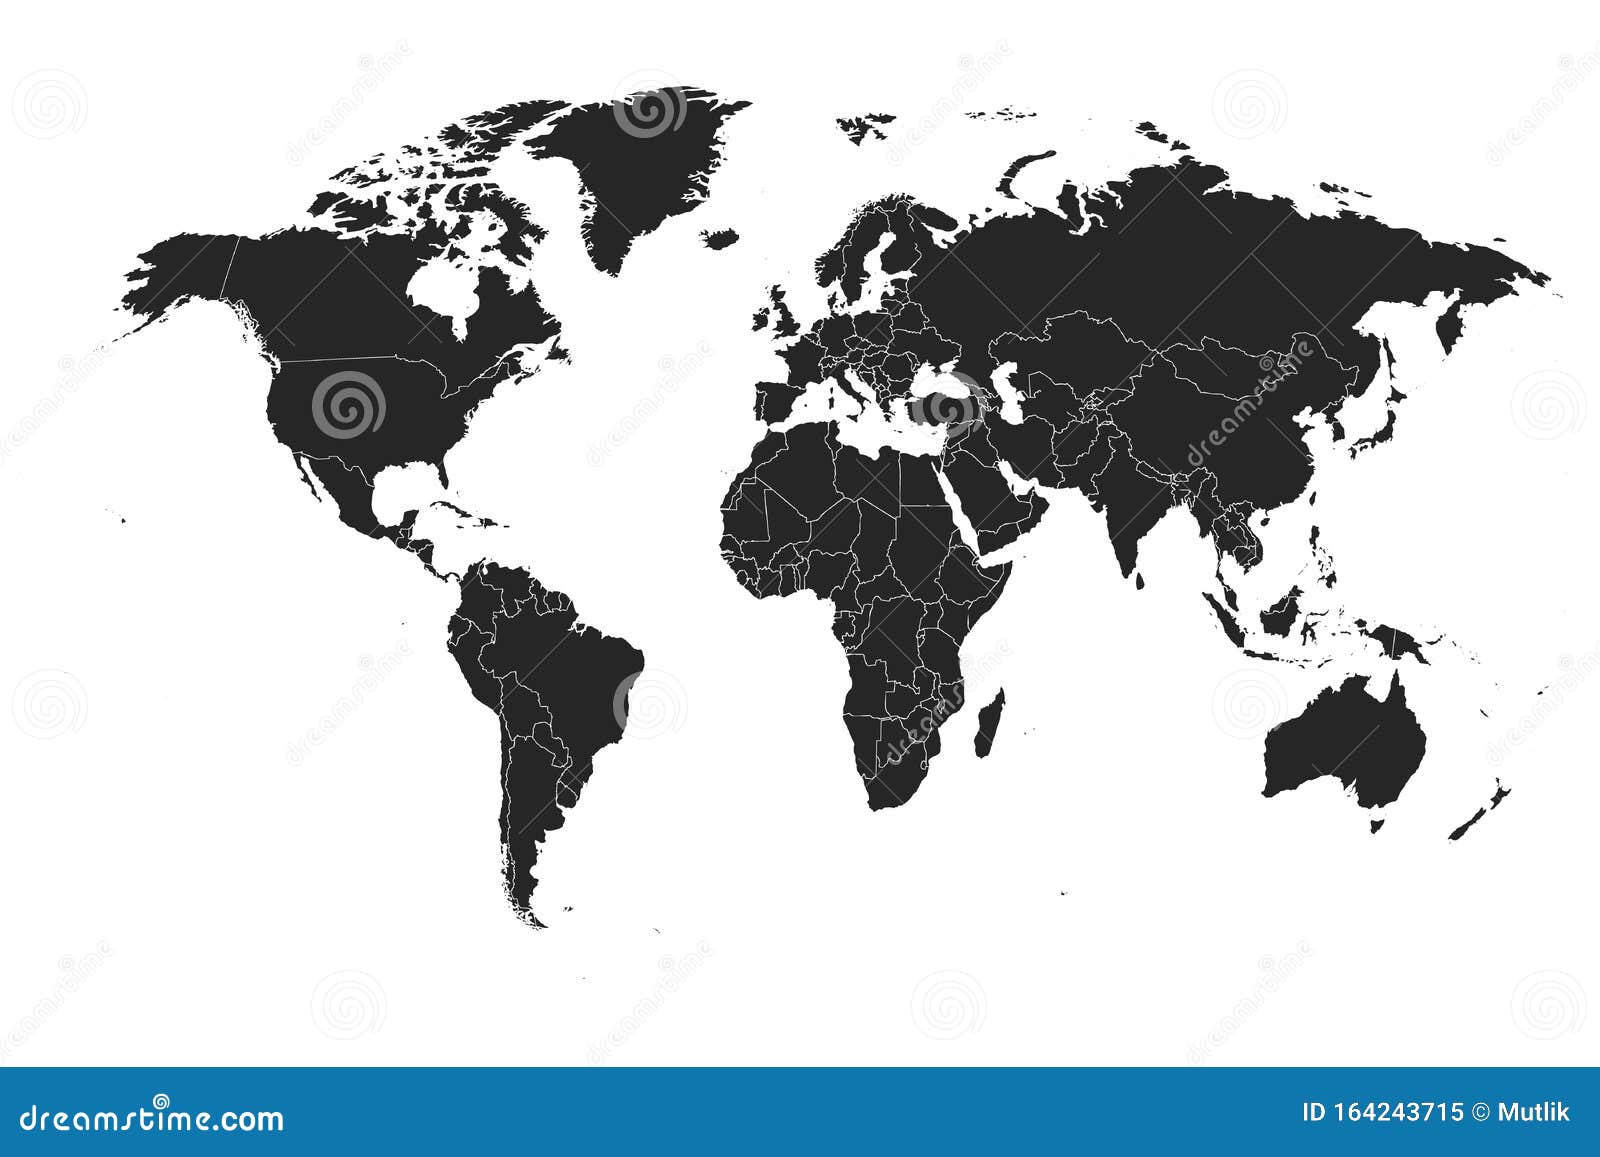 Accurate World Map Detailed Stock Illustrations 237 Accurate World Map Detailed Stock Illustrations Vectors Clipart Dreamstime